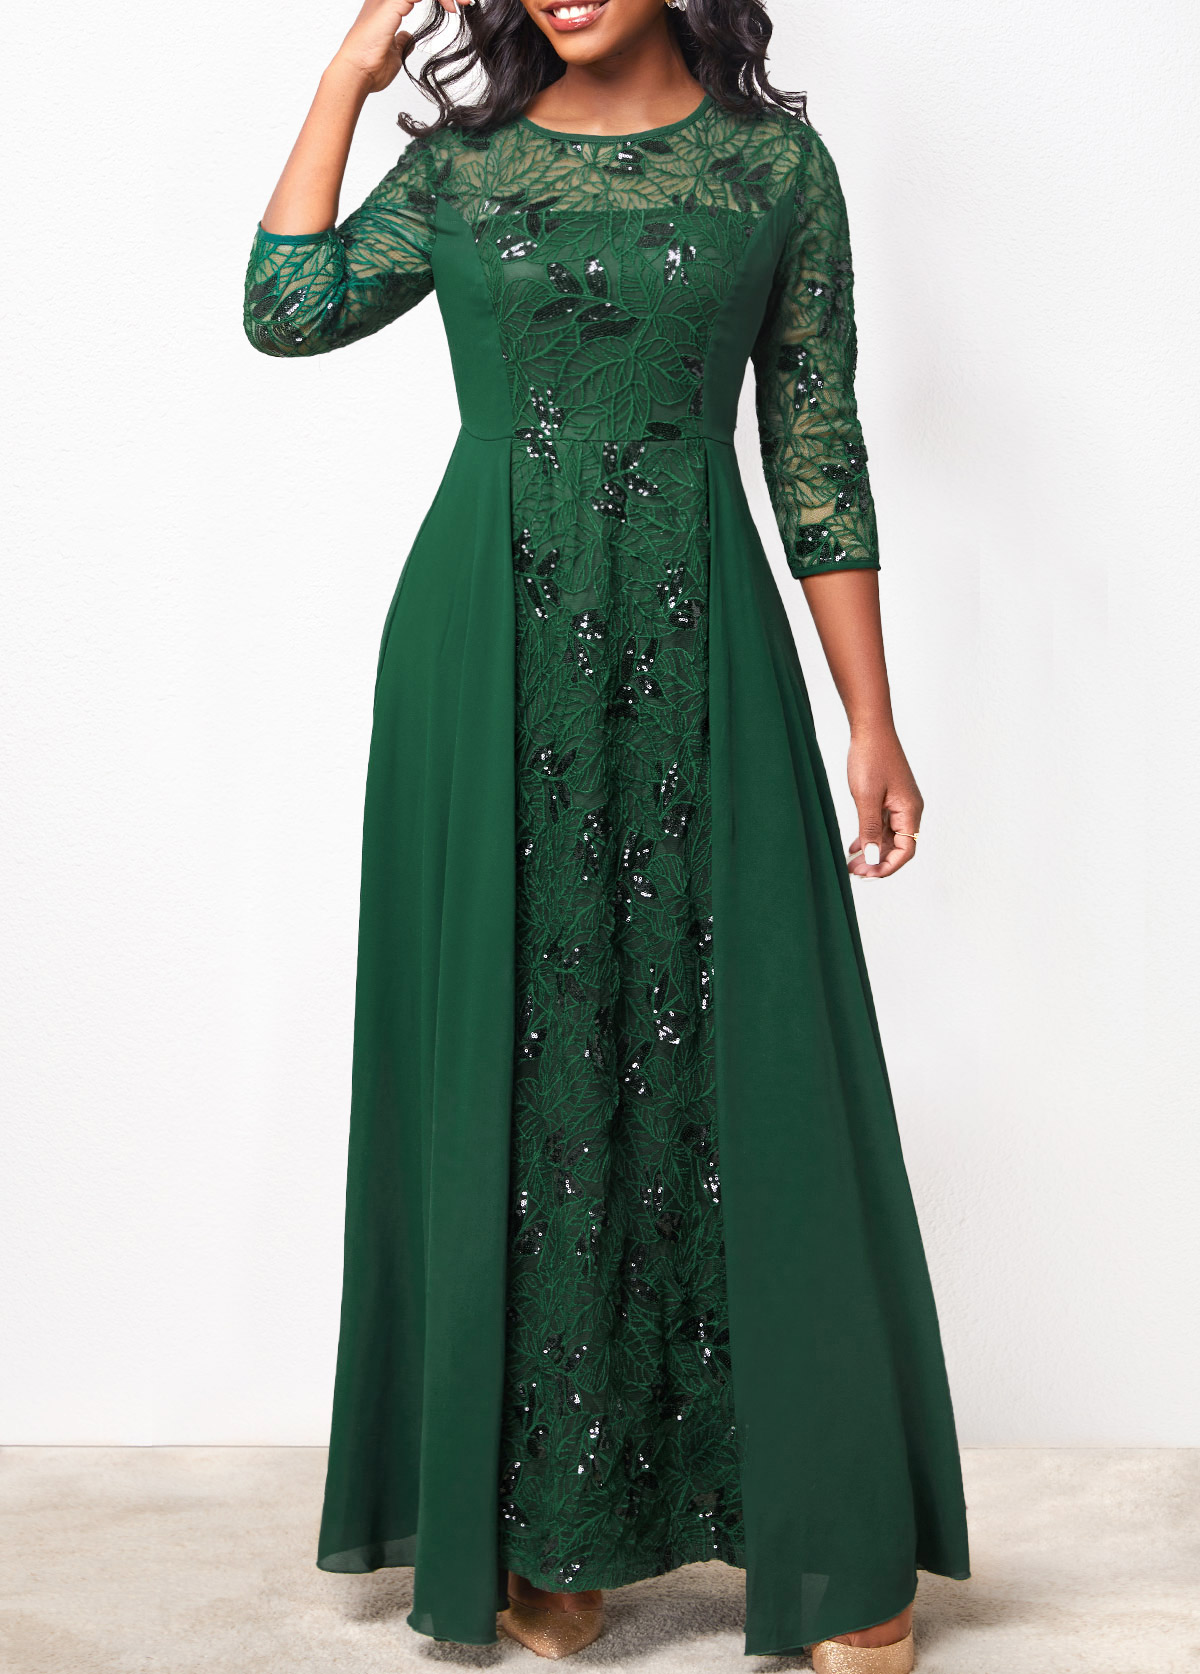 Sequin Lace Blackish Green Round Neck Maxi Dress